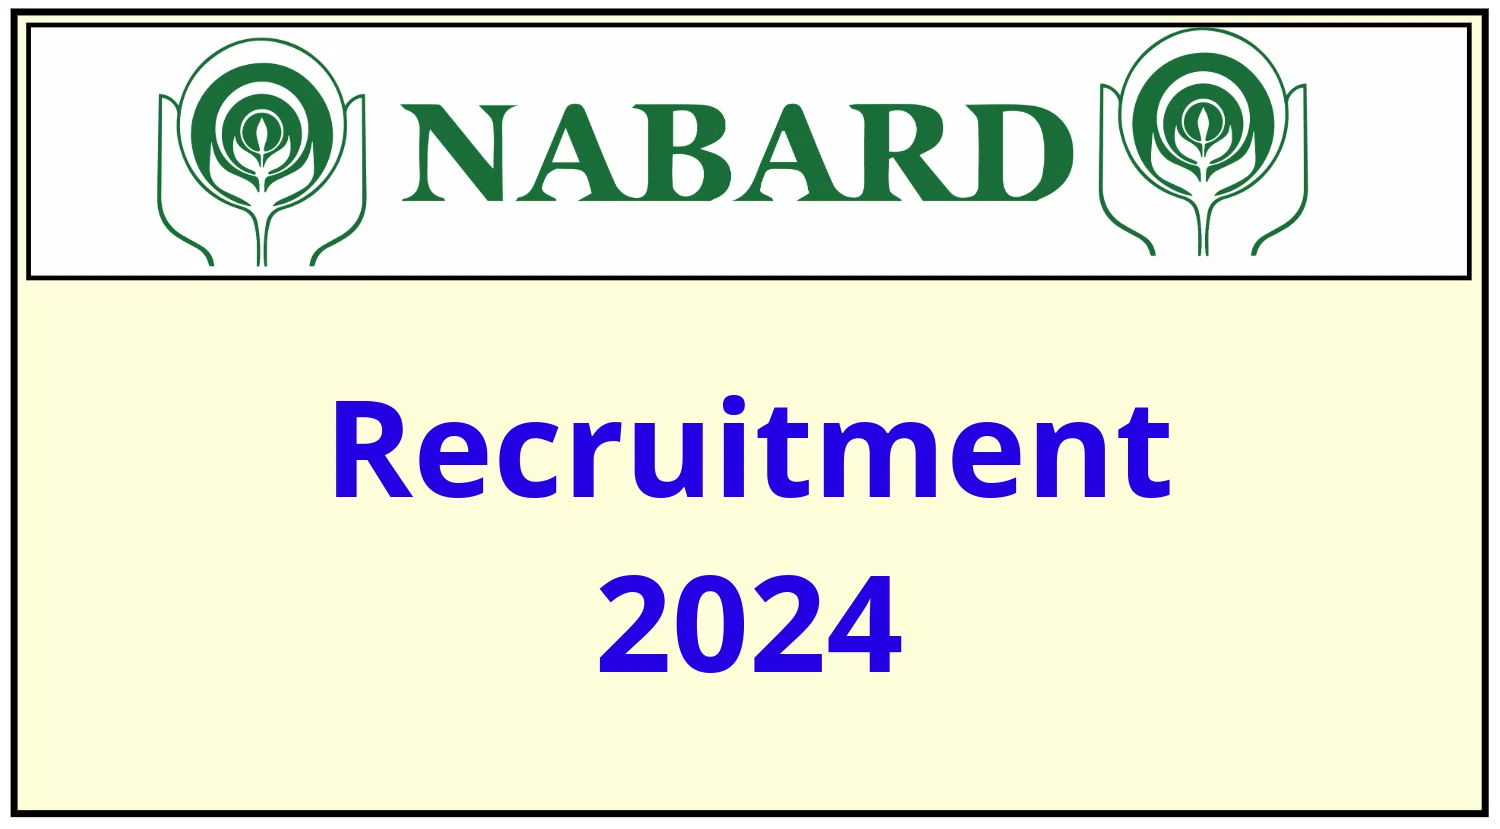 NABARD Recruitment 2024 Notification Out